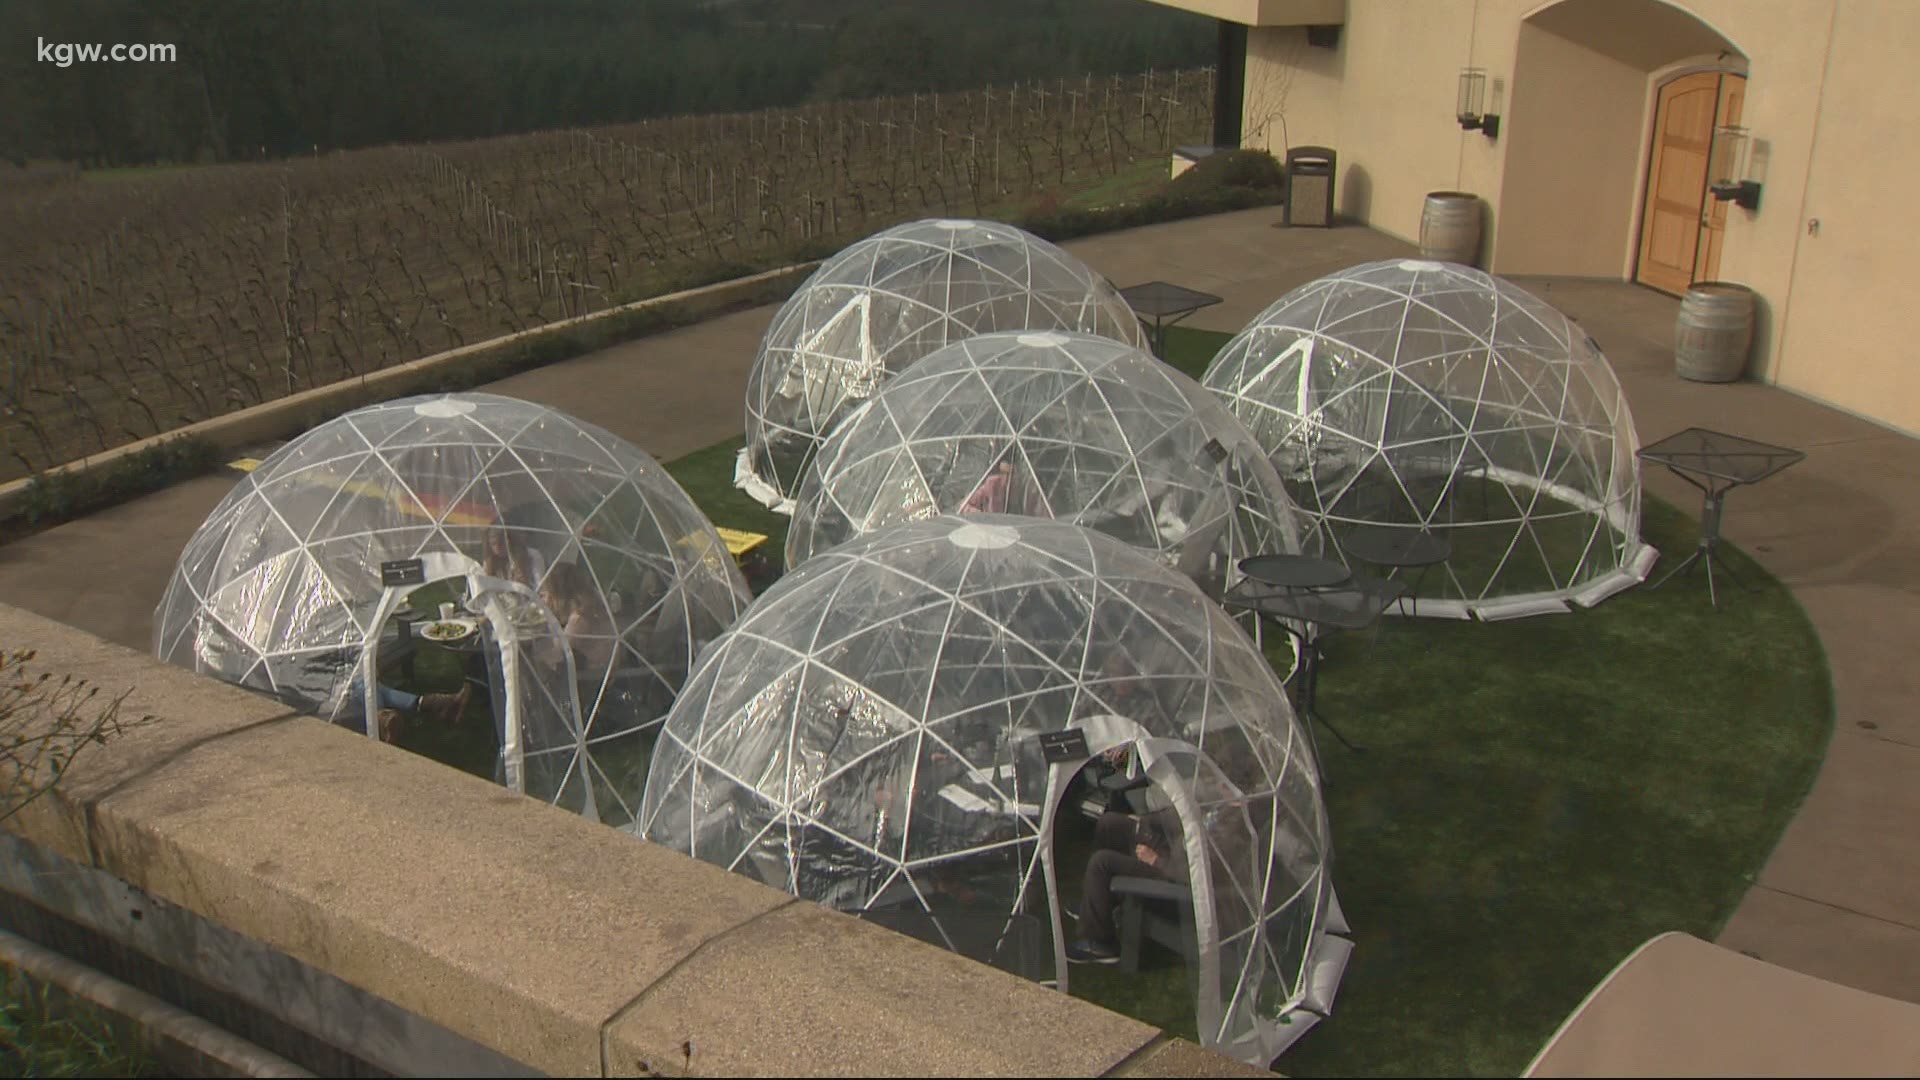 So, they're not actually bubbles, they are clear igloo-like structures that allow for COVID-safe outdoor dining without that signature PNW rain.